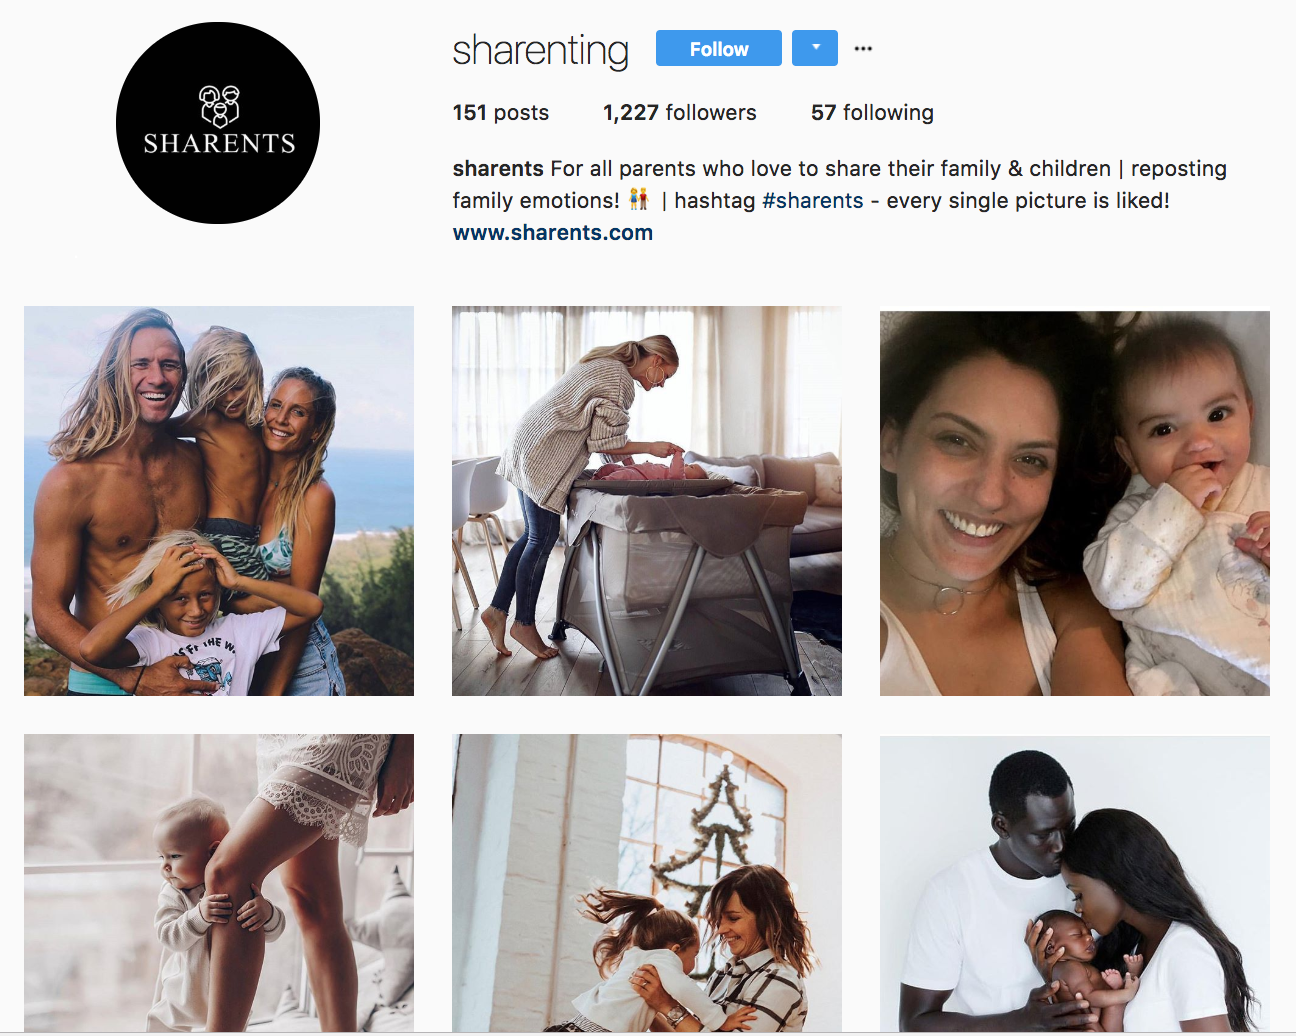 sharents___sharenting__e280a2_instagram_photos_and_videos.png